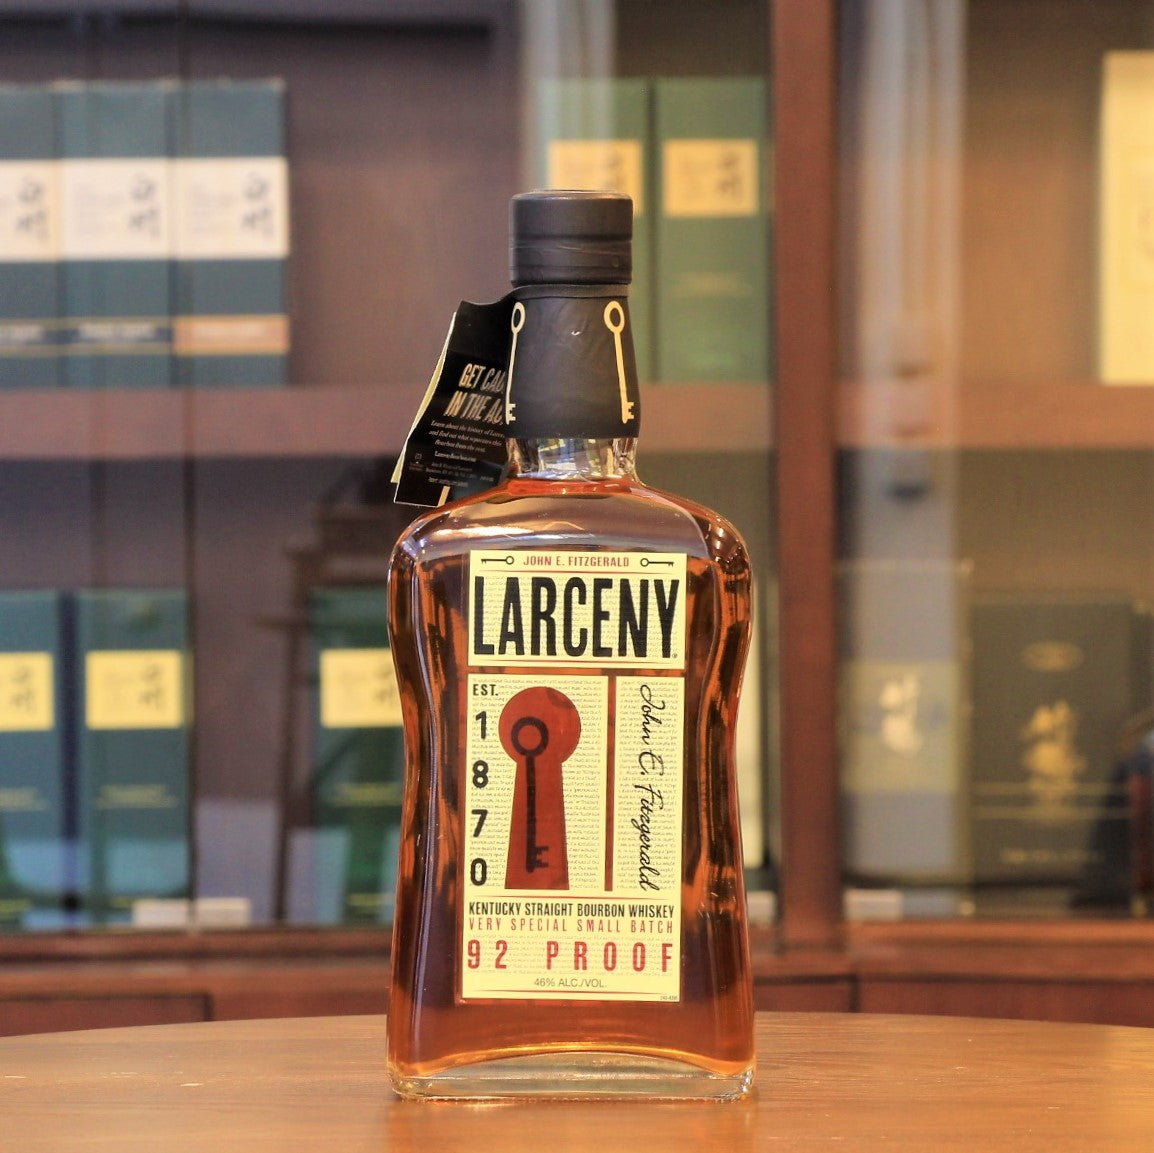 This Larceny Kentucky Straight Bourbon is following the tradition of Old Fitzgerald to use more wheat (instead of rye) as the secondary grain in the mashbill yielding a softer and rounder character. Limited number of barrels in rickhouse are hand-selected by master distiller and vatted as a  special small batch, bottled at 92 proof. 